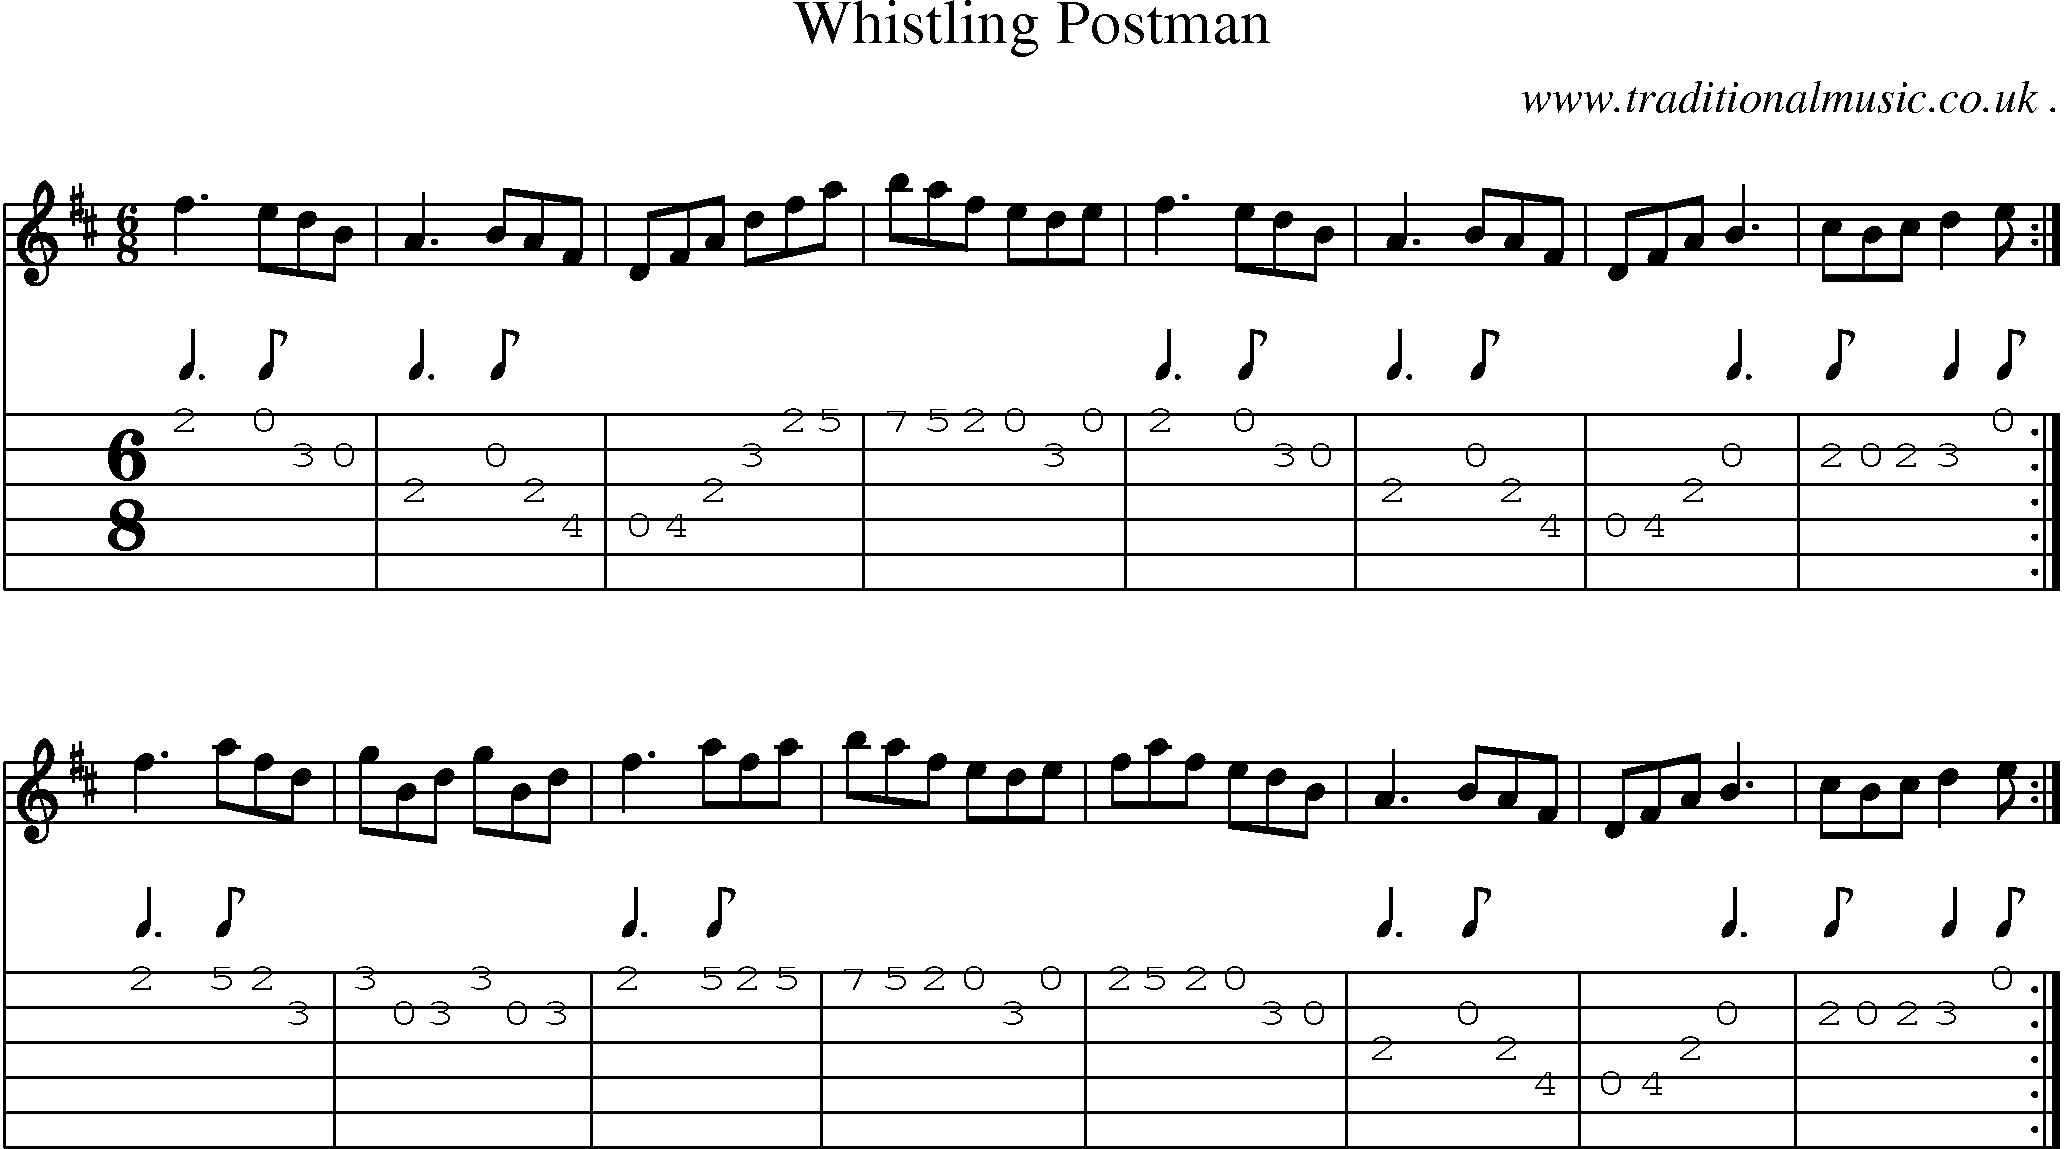 Sheet-Music and Guitar Tabs for Whistling Postman